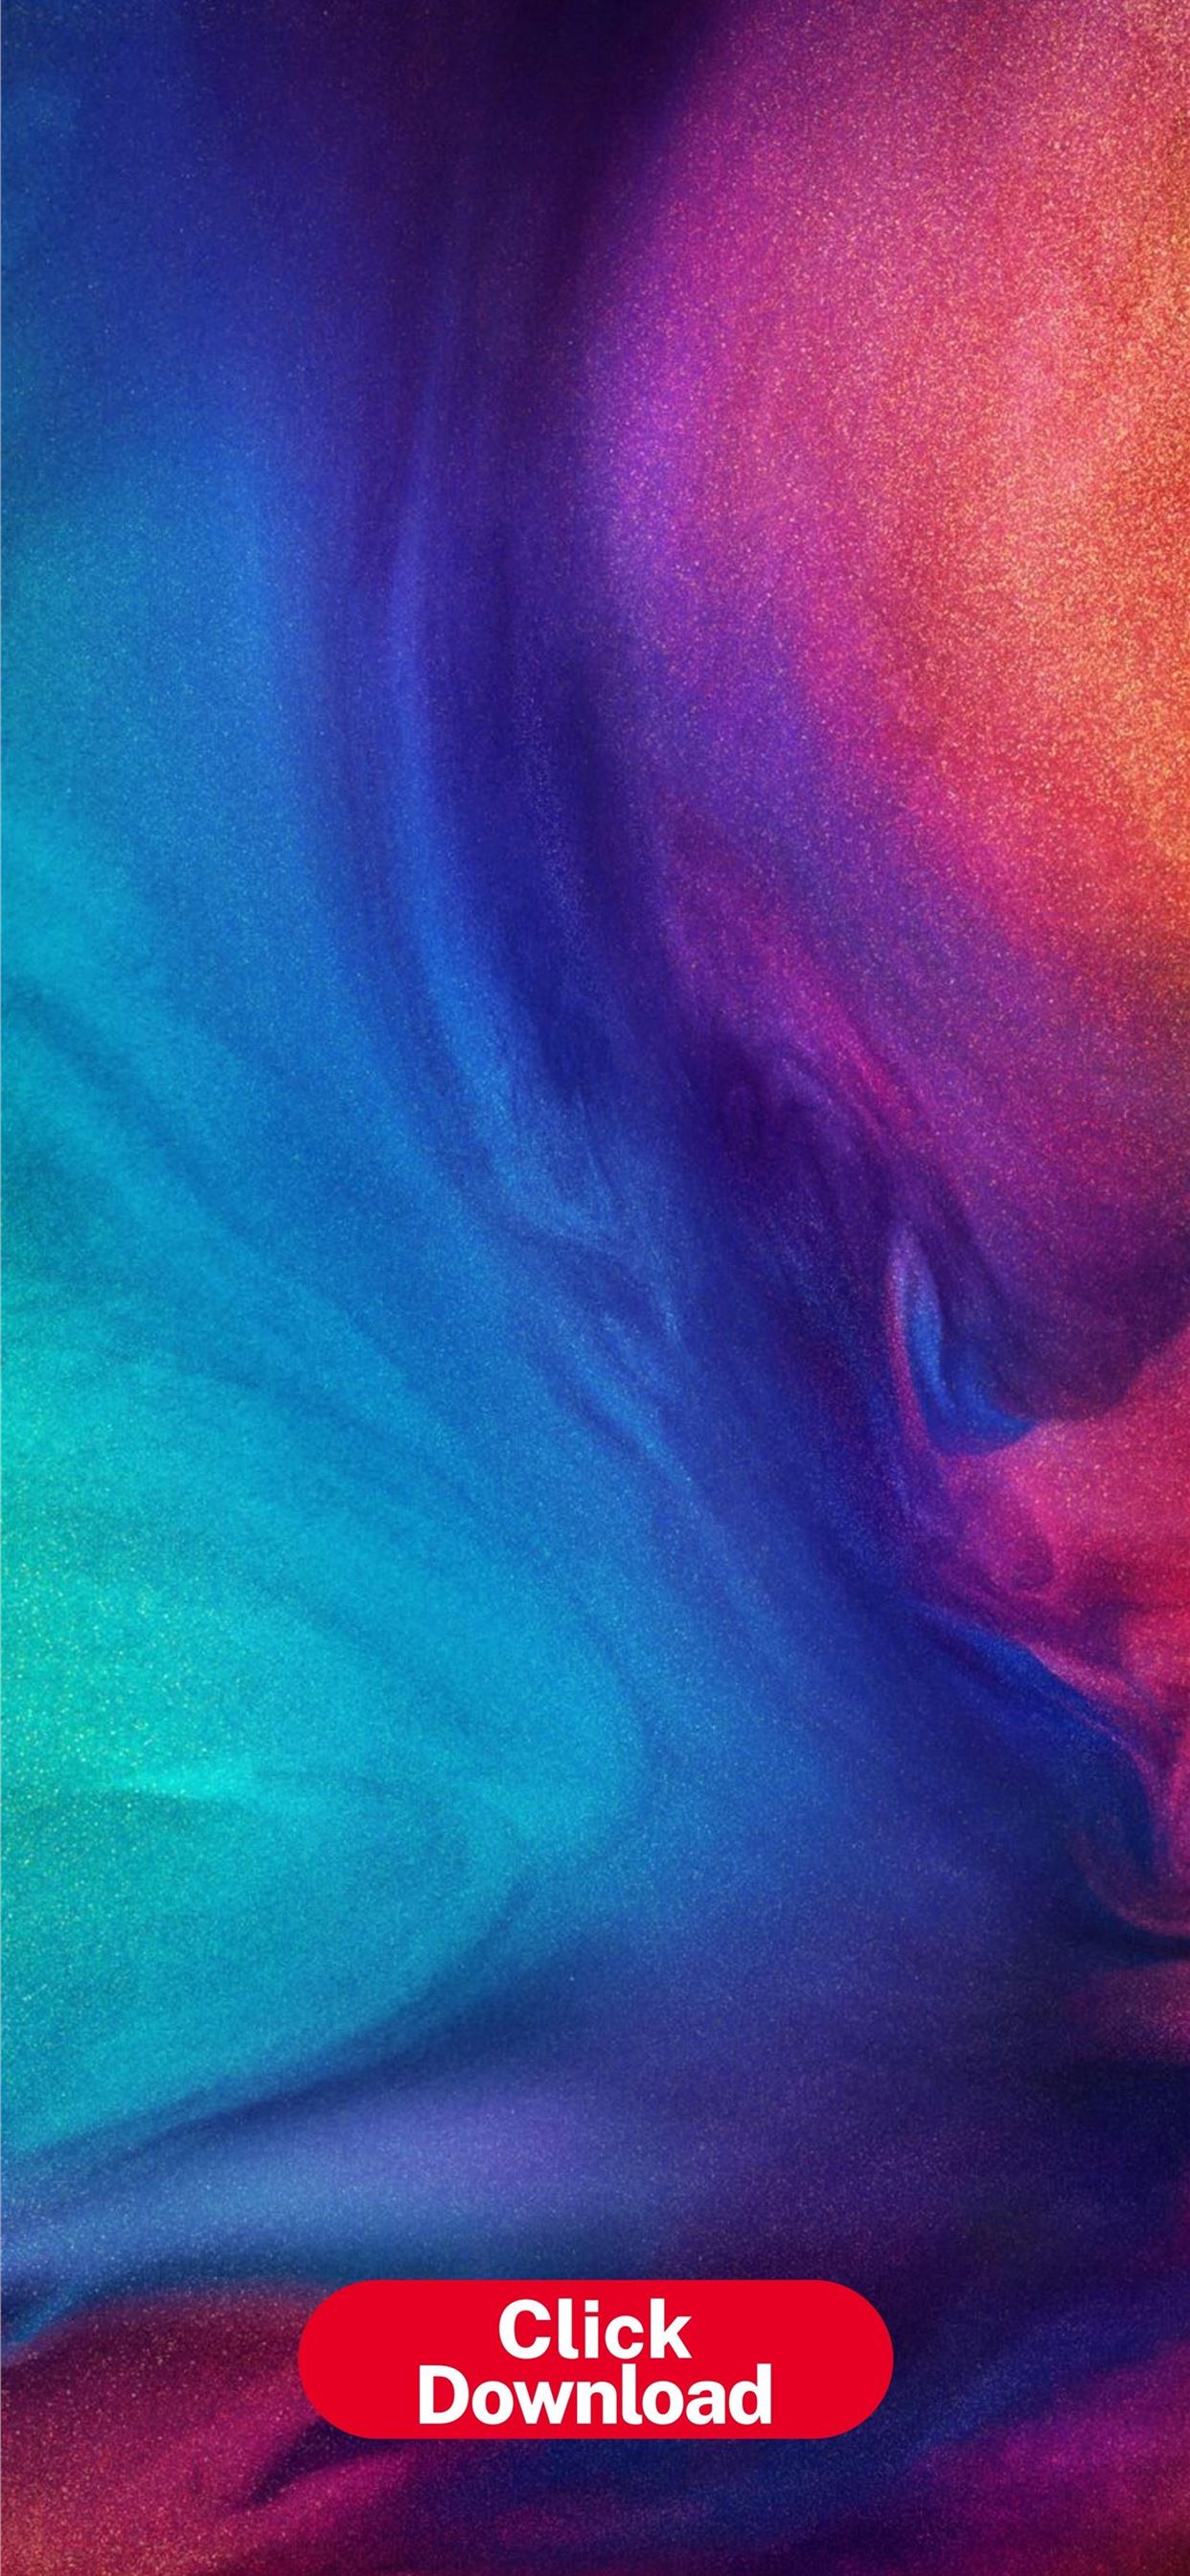 Download Xiaomi Redmi Note 7 Stock Wallpapers - ZIP File Included